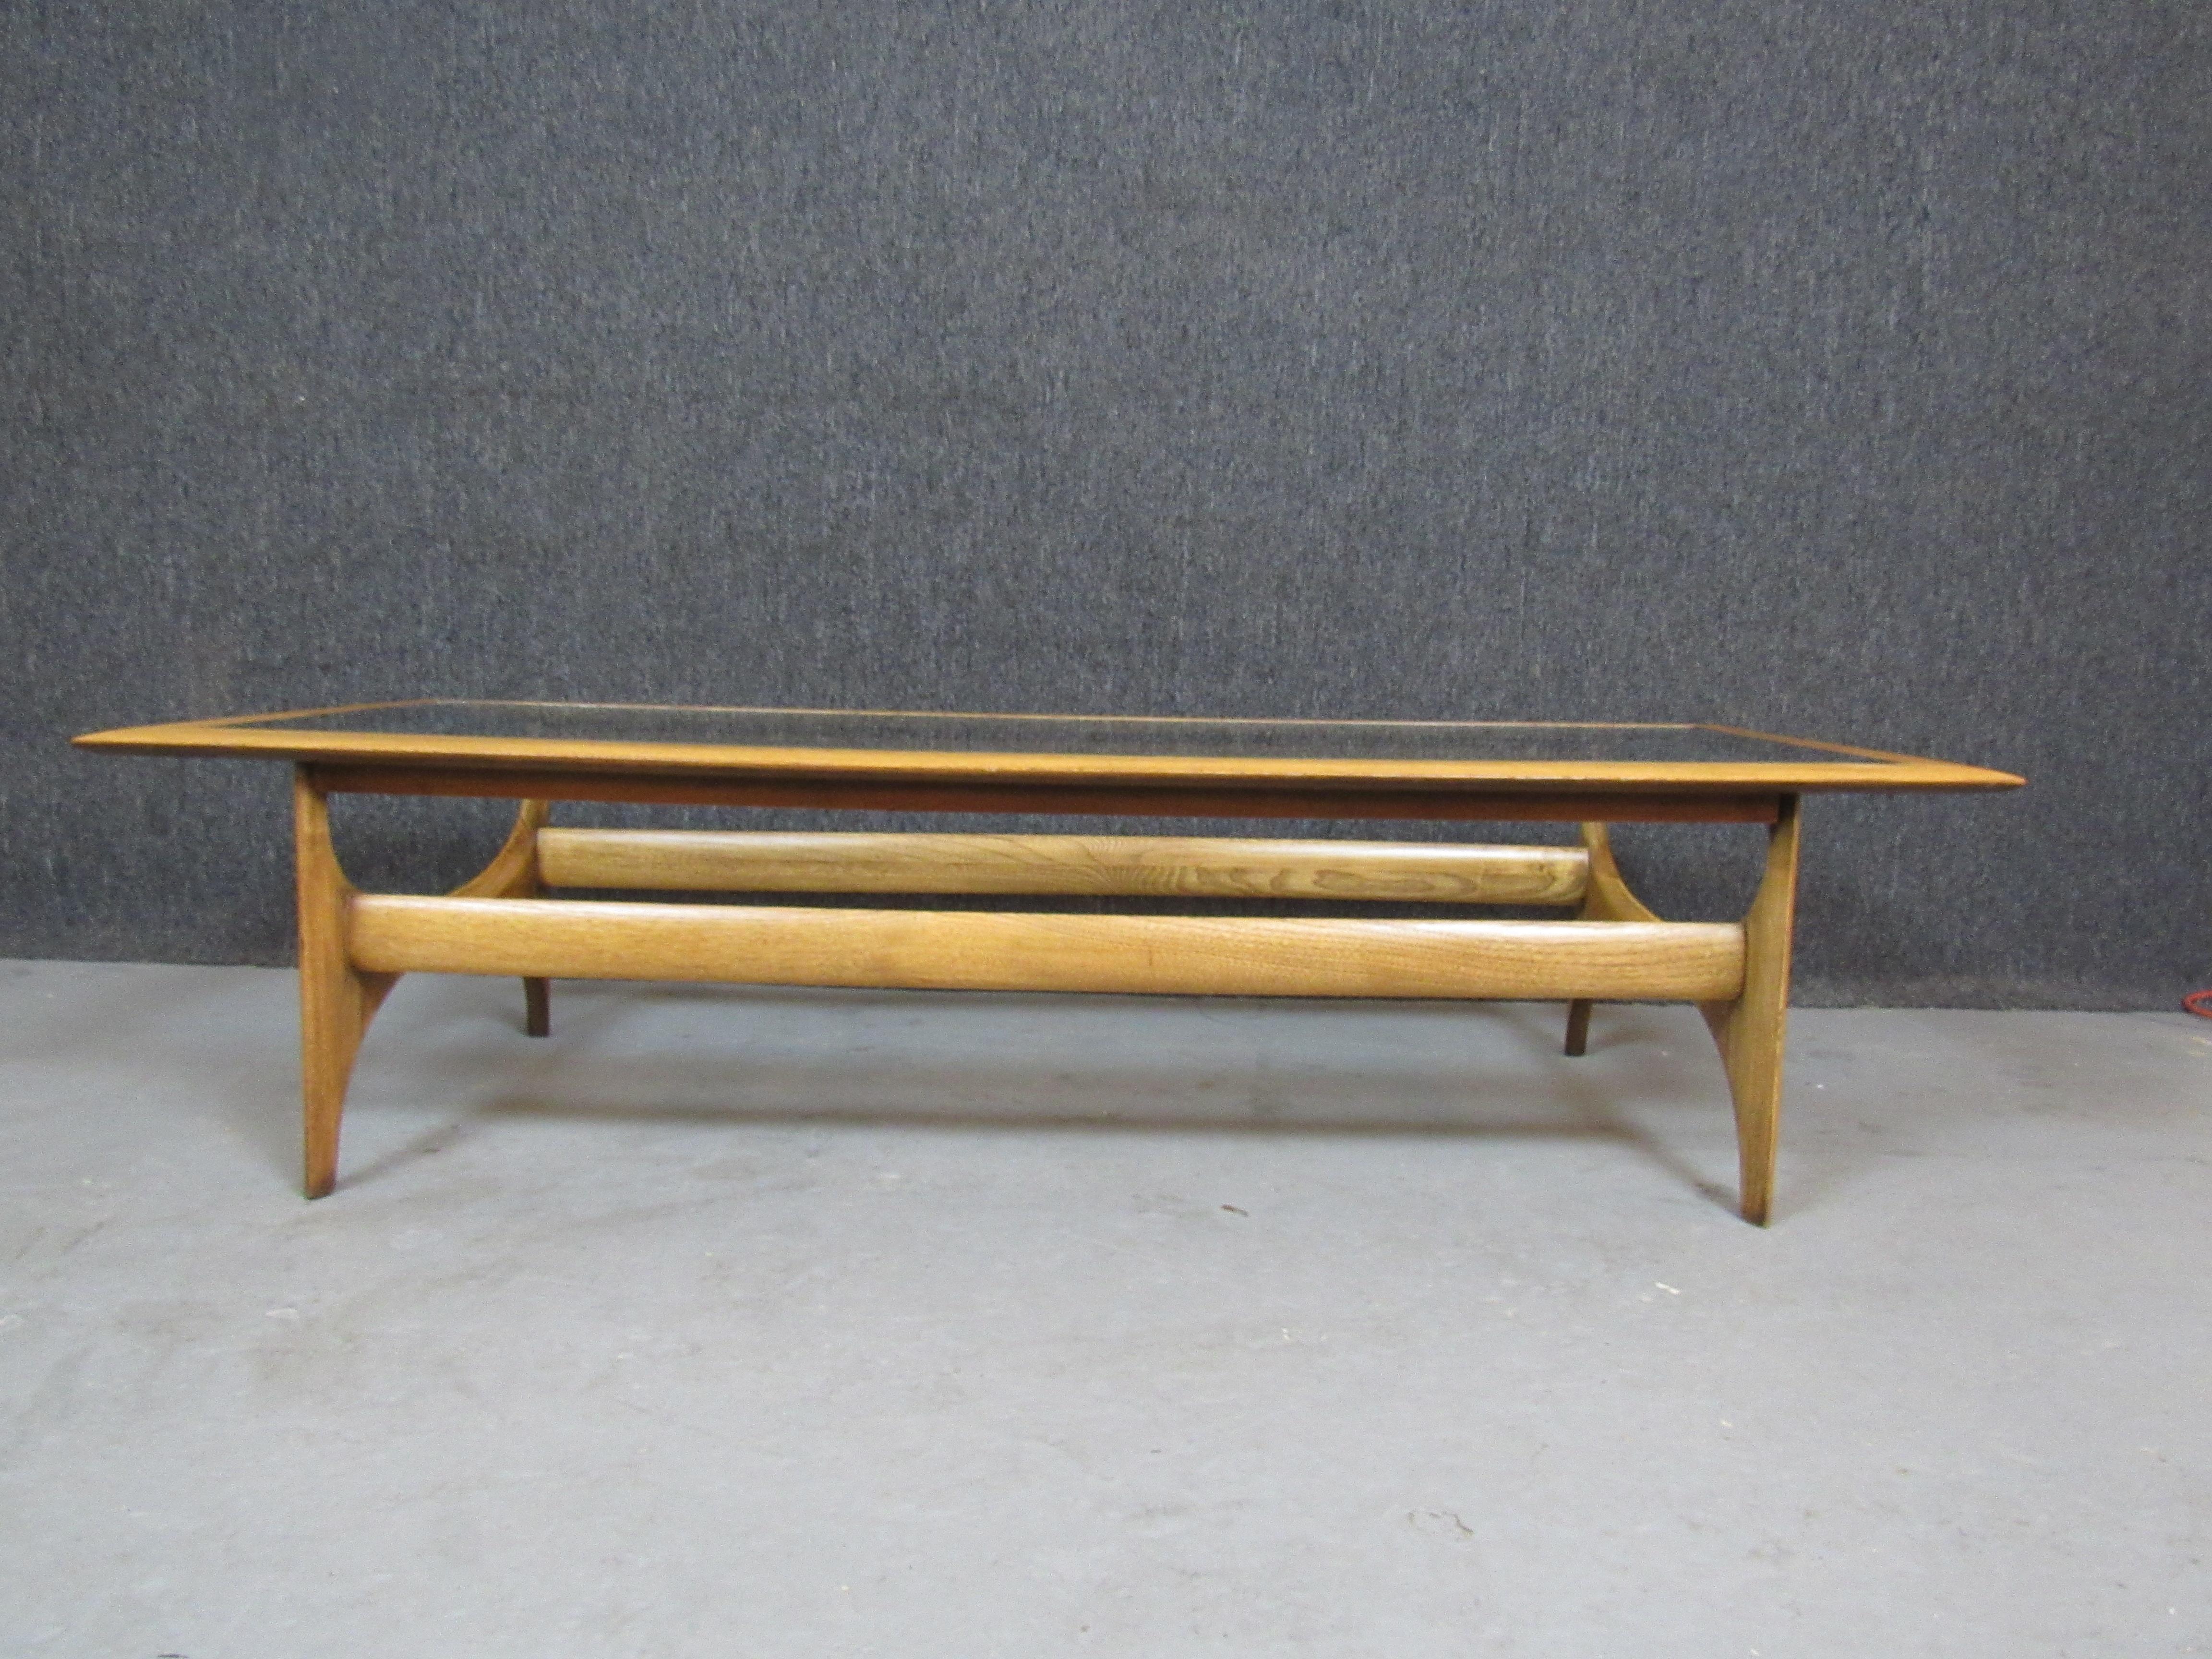 Fantastic American mid-century modern coffee table from the legendary Lane Furniture Company of Altavista, Virginia. A sculptural oak frame pays homage to the designs of Paul Evans and Oscar Niemeyer, blending both brutalist and Brazilian